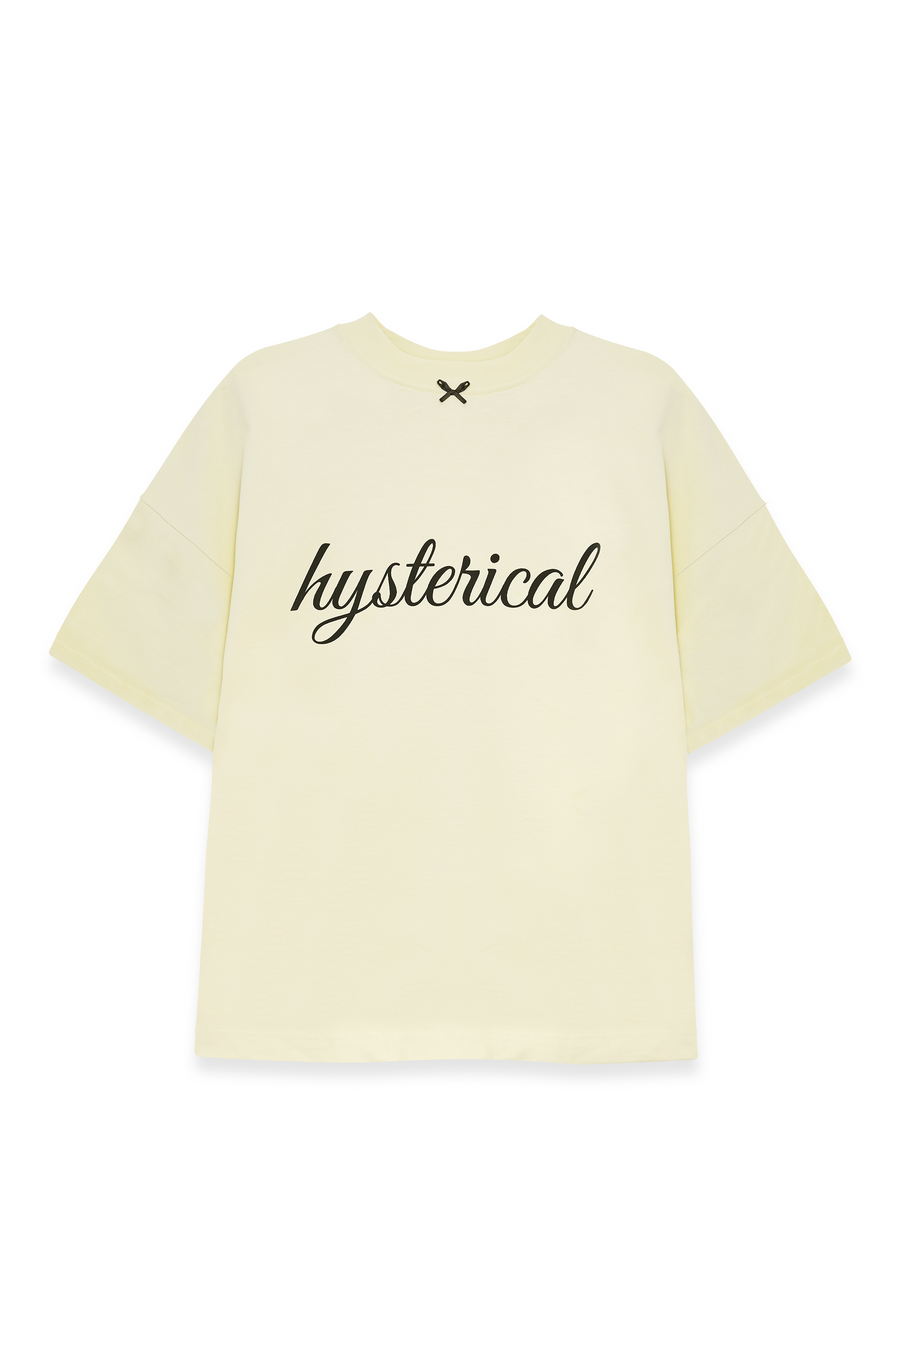 Hysterical Oversized Tee